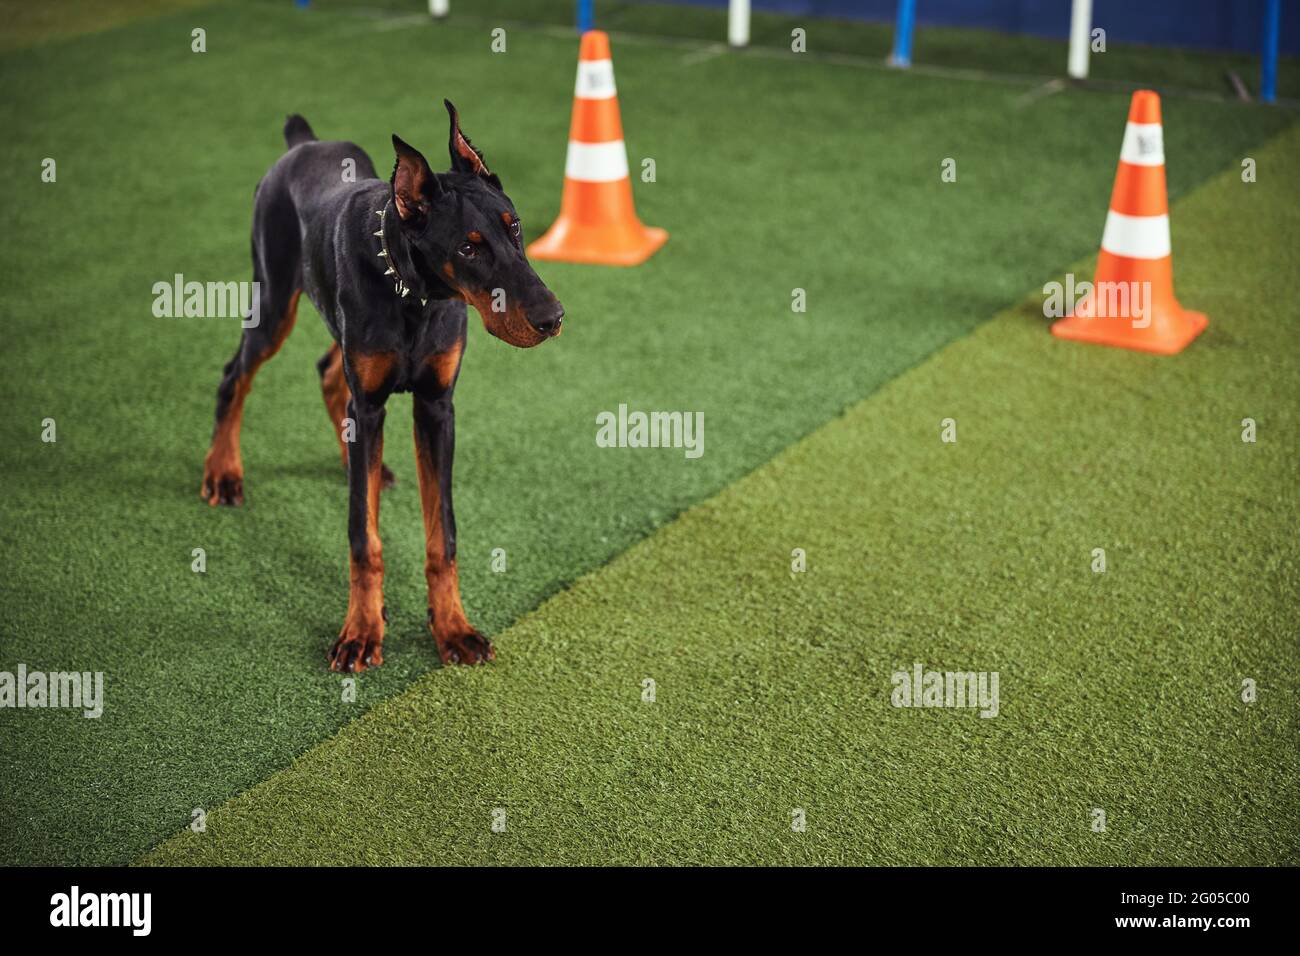 Dog with a sleek coat and a docked tail standing indoors Stock Photo